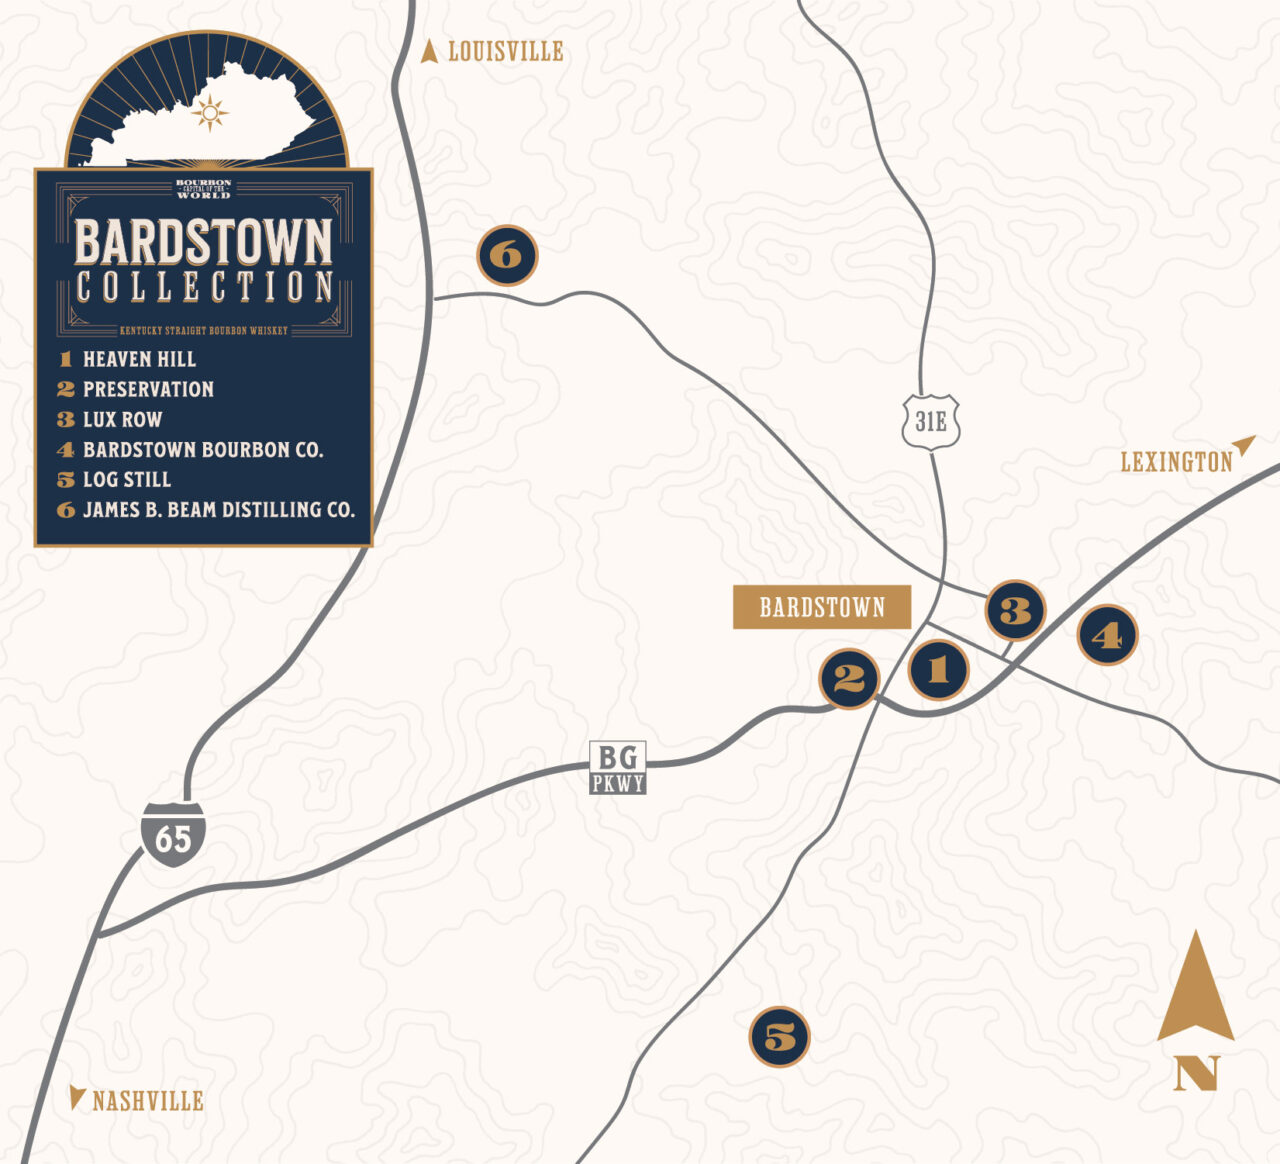 Bardstown Collection MultiDay Bourbon Experience Tours & Tastings